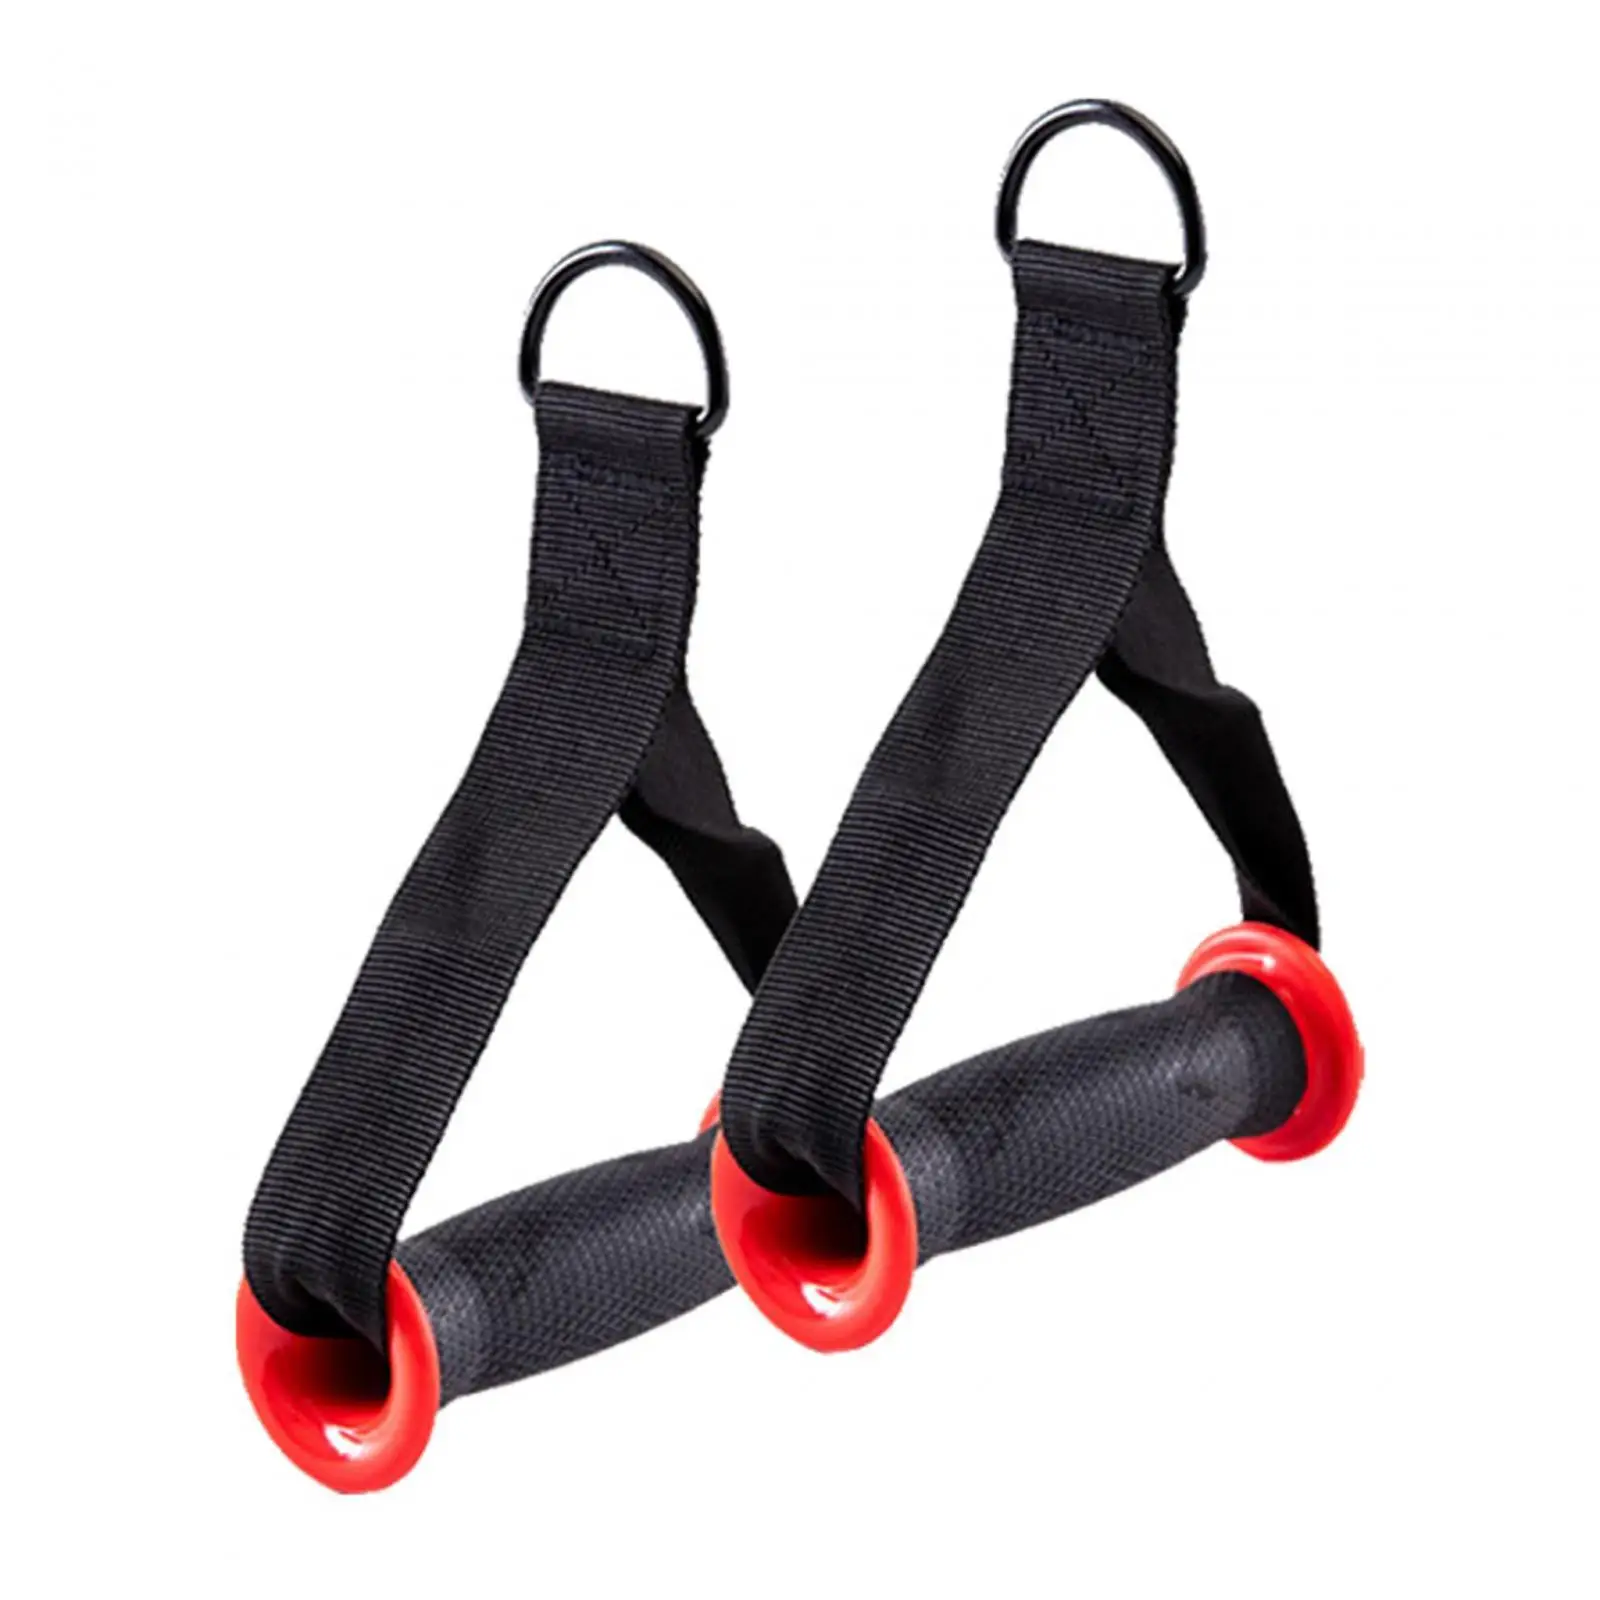 2Pcs Cable Machine Attachment Handles Workout Home Stretch Tube Resistance Exercise Yoga Tricep Rope Press Handles